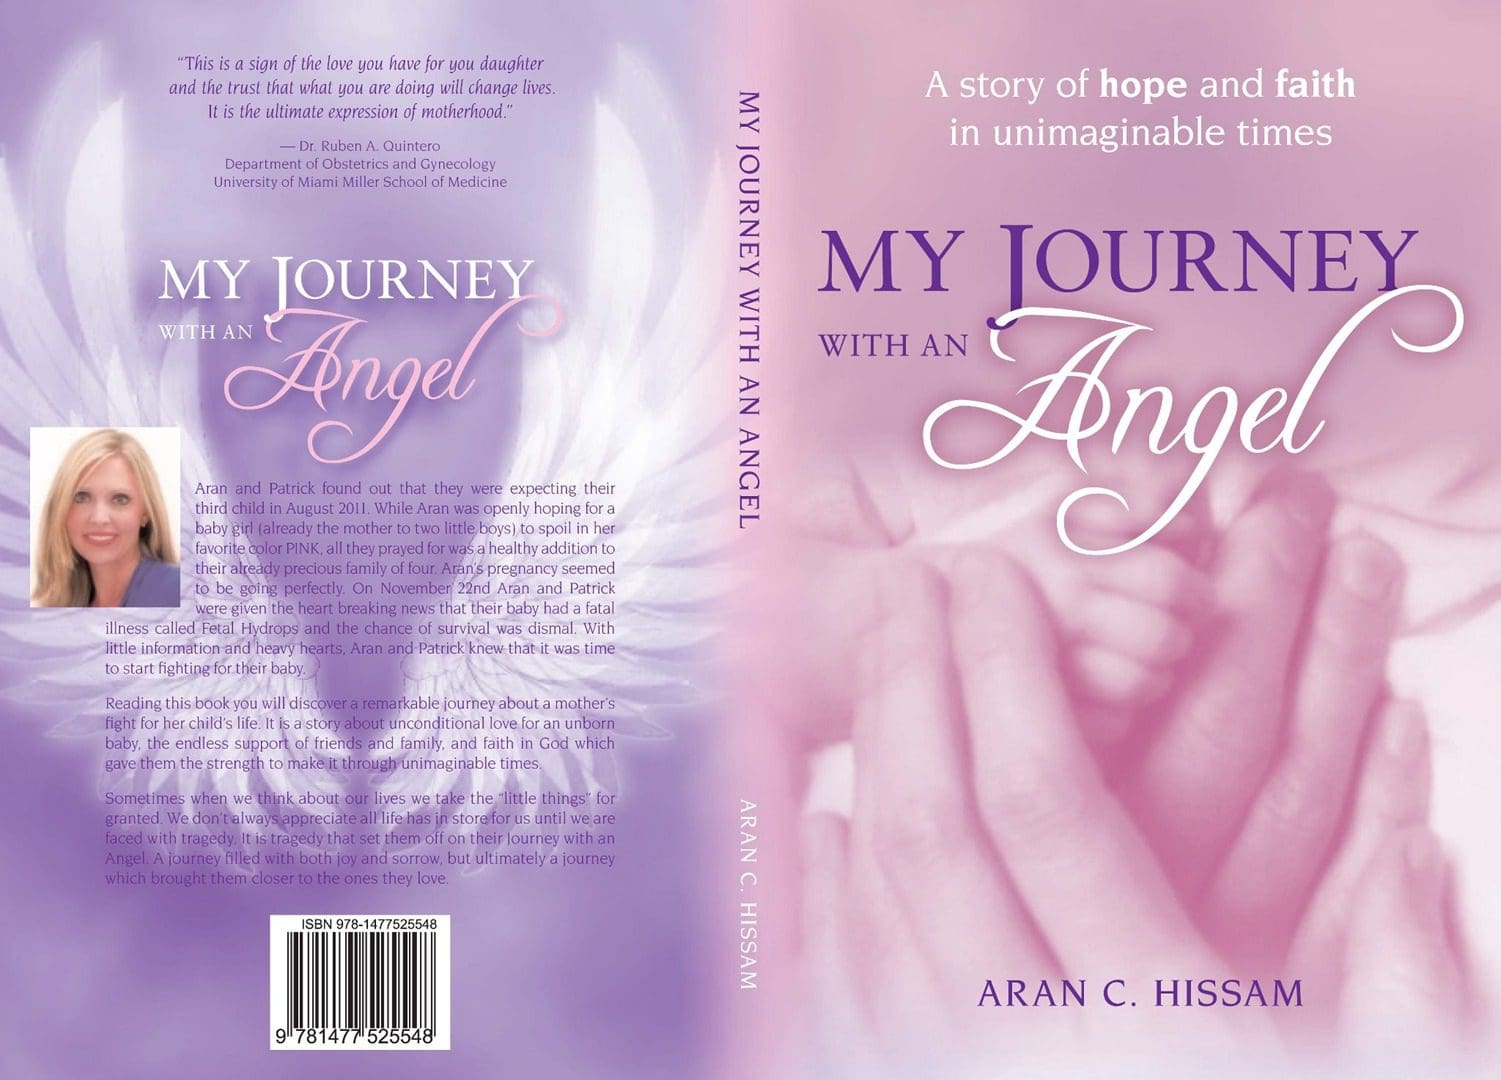 A book cover with the title of my journey, and an angel.